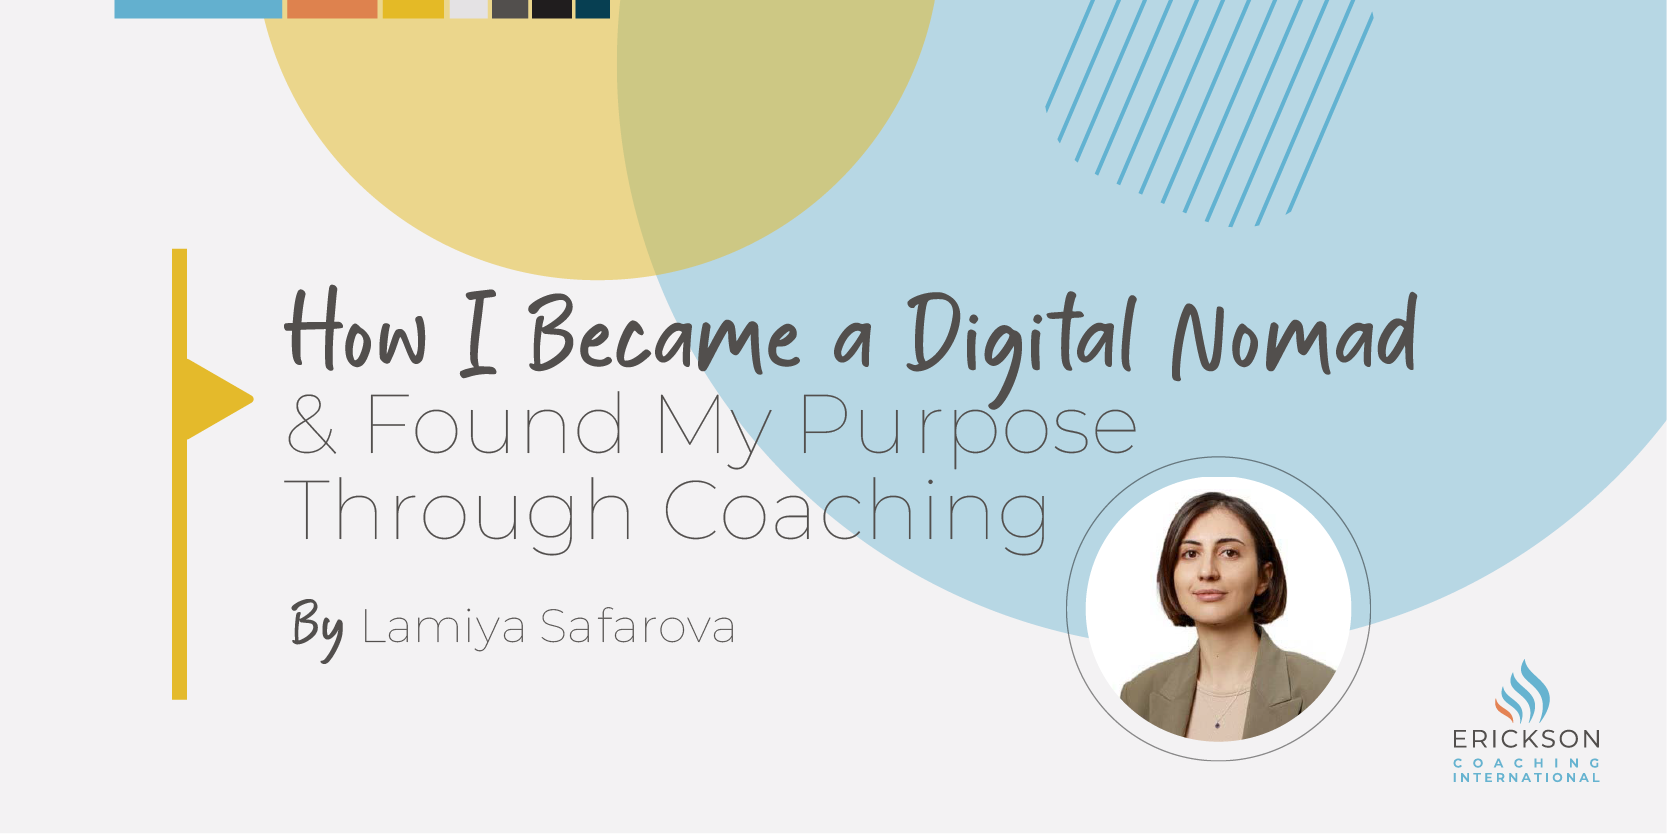 How I Became a Digital Nomad and Found My Purpose Through Coaching